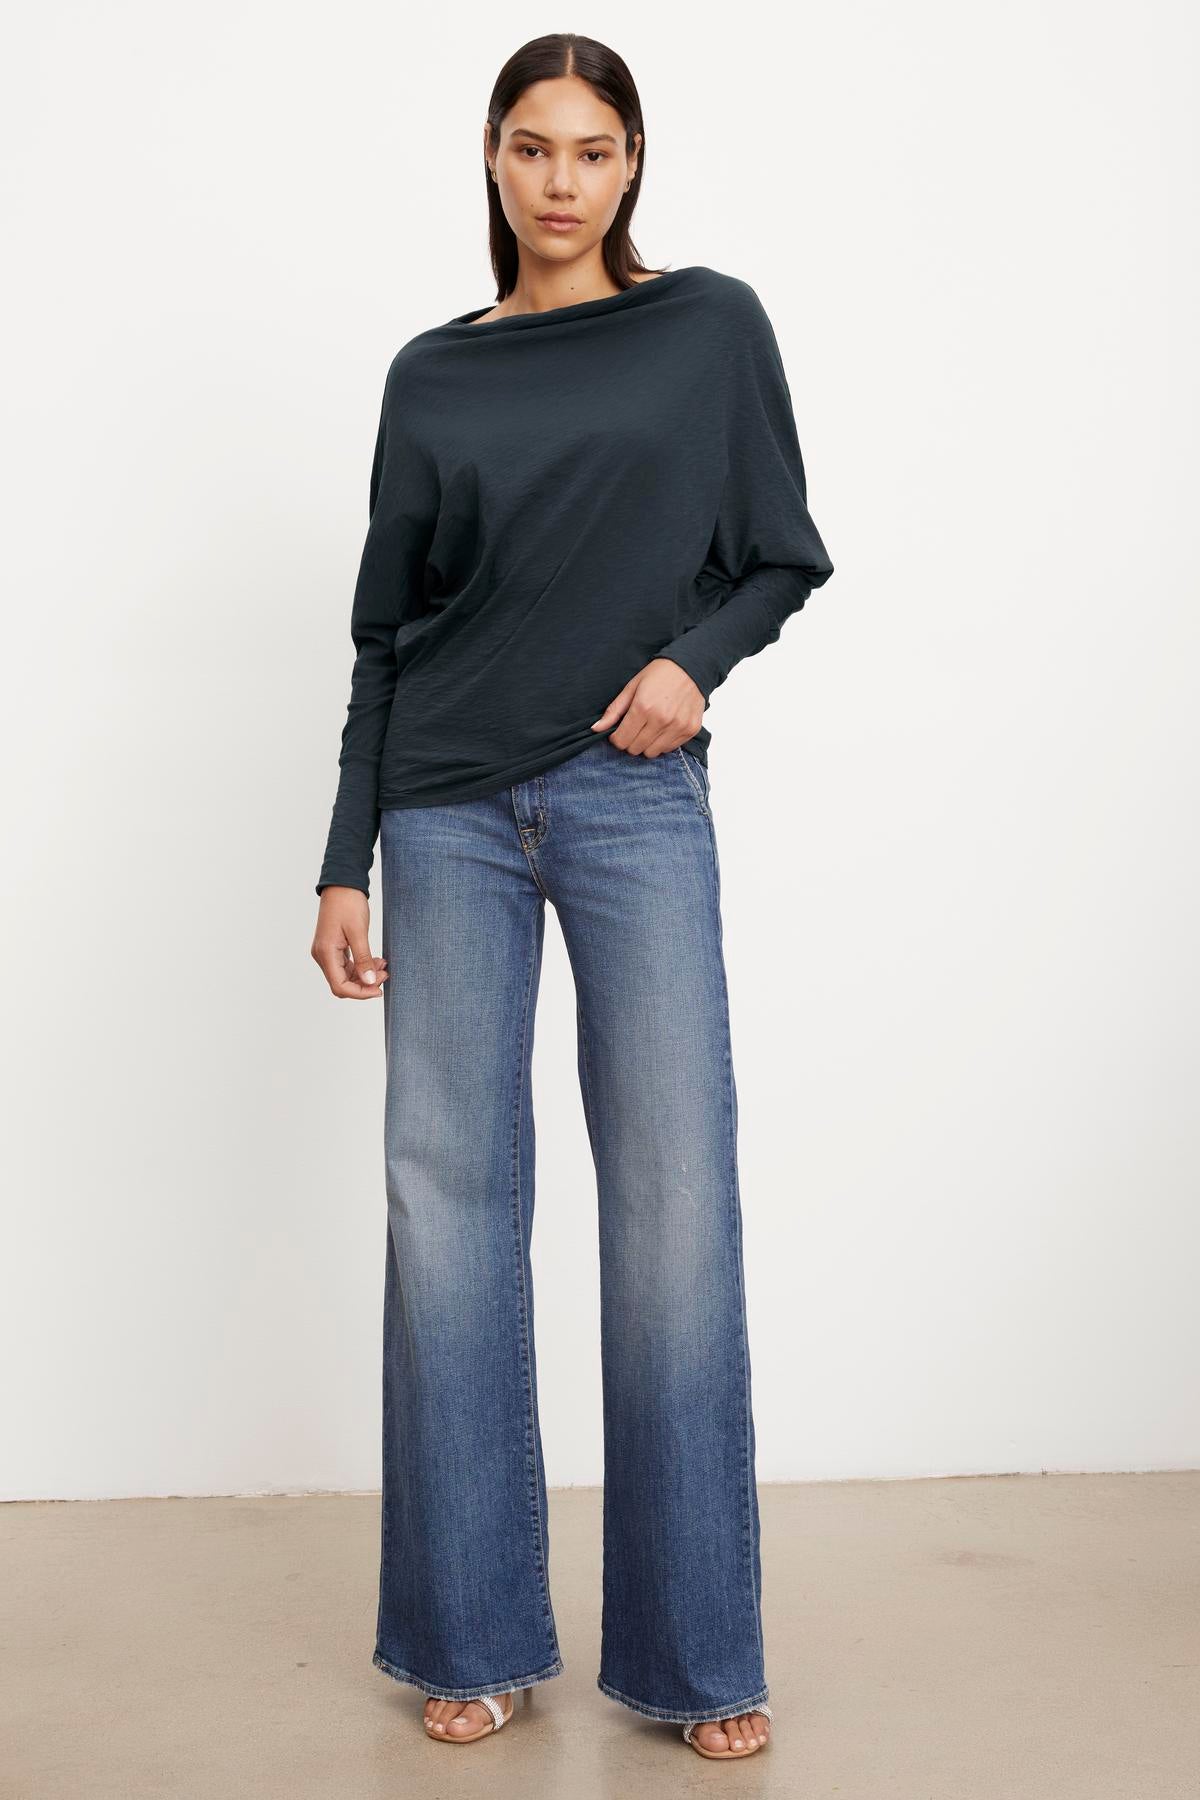   The model is wearing a Velvet by Graham & Spencer NOVALEE DOLMAN TEE with dolman sleeves and flared jeans. 